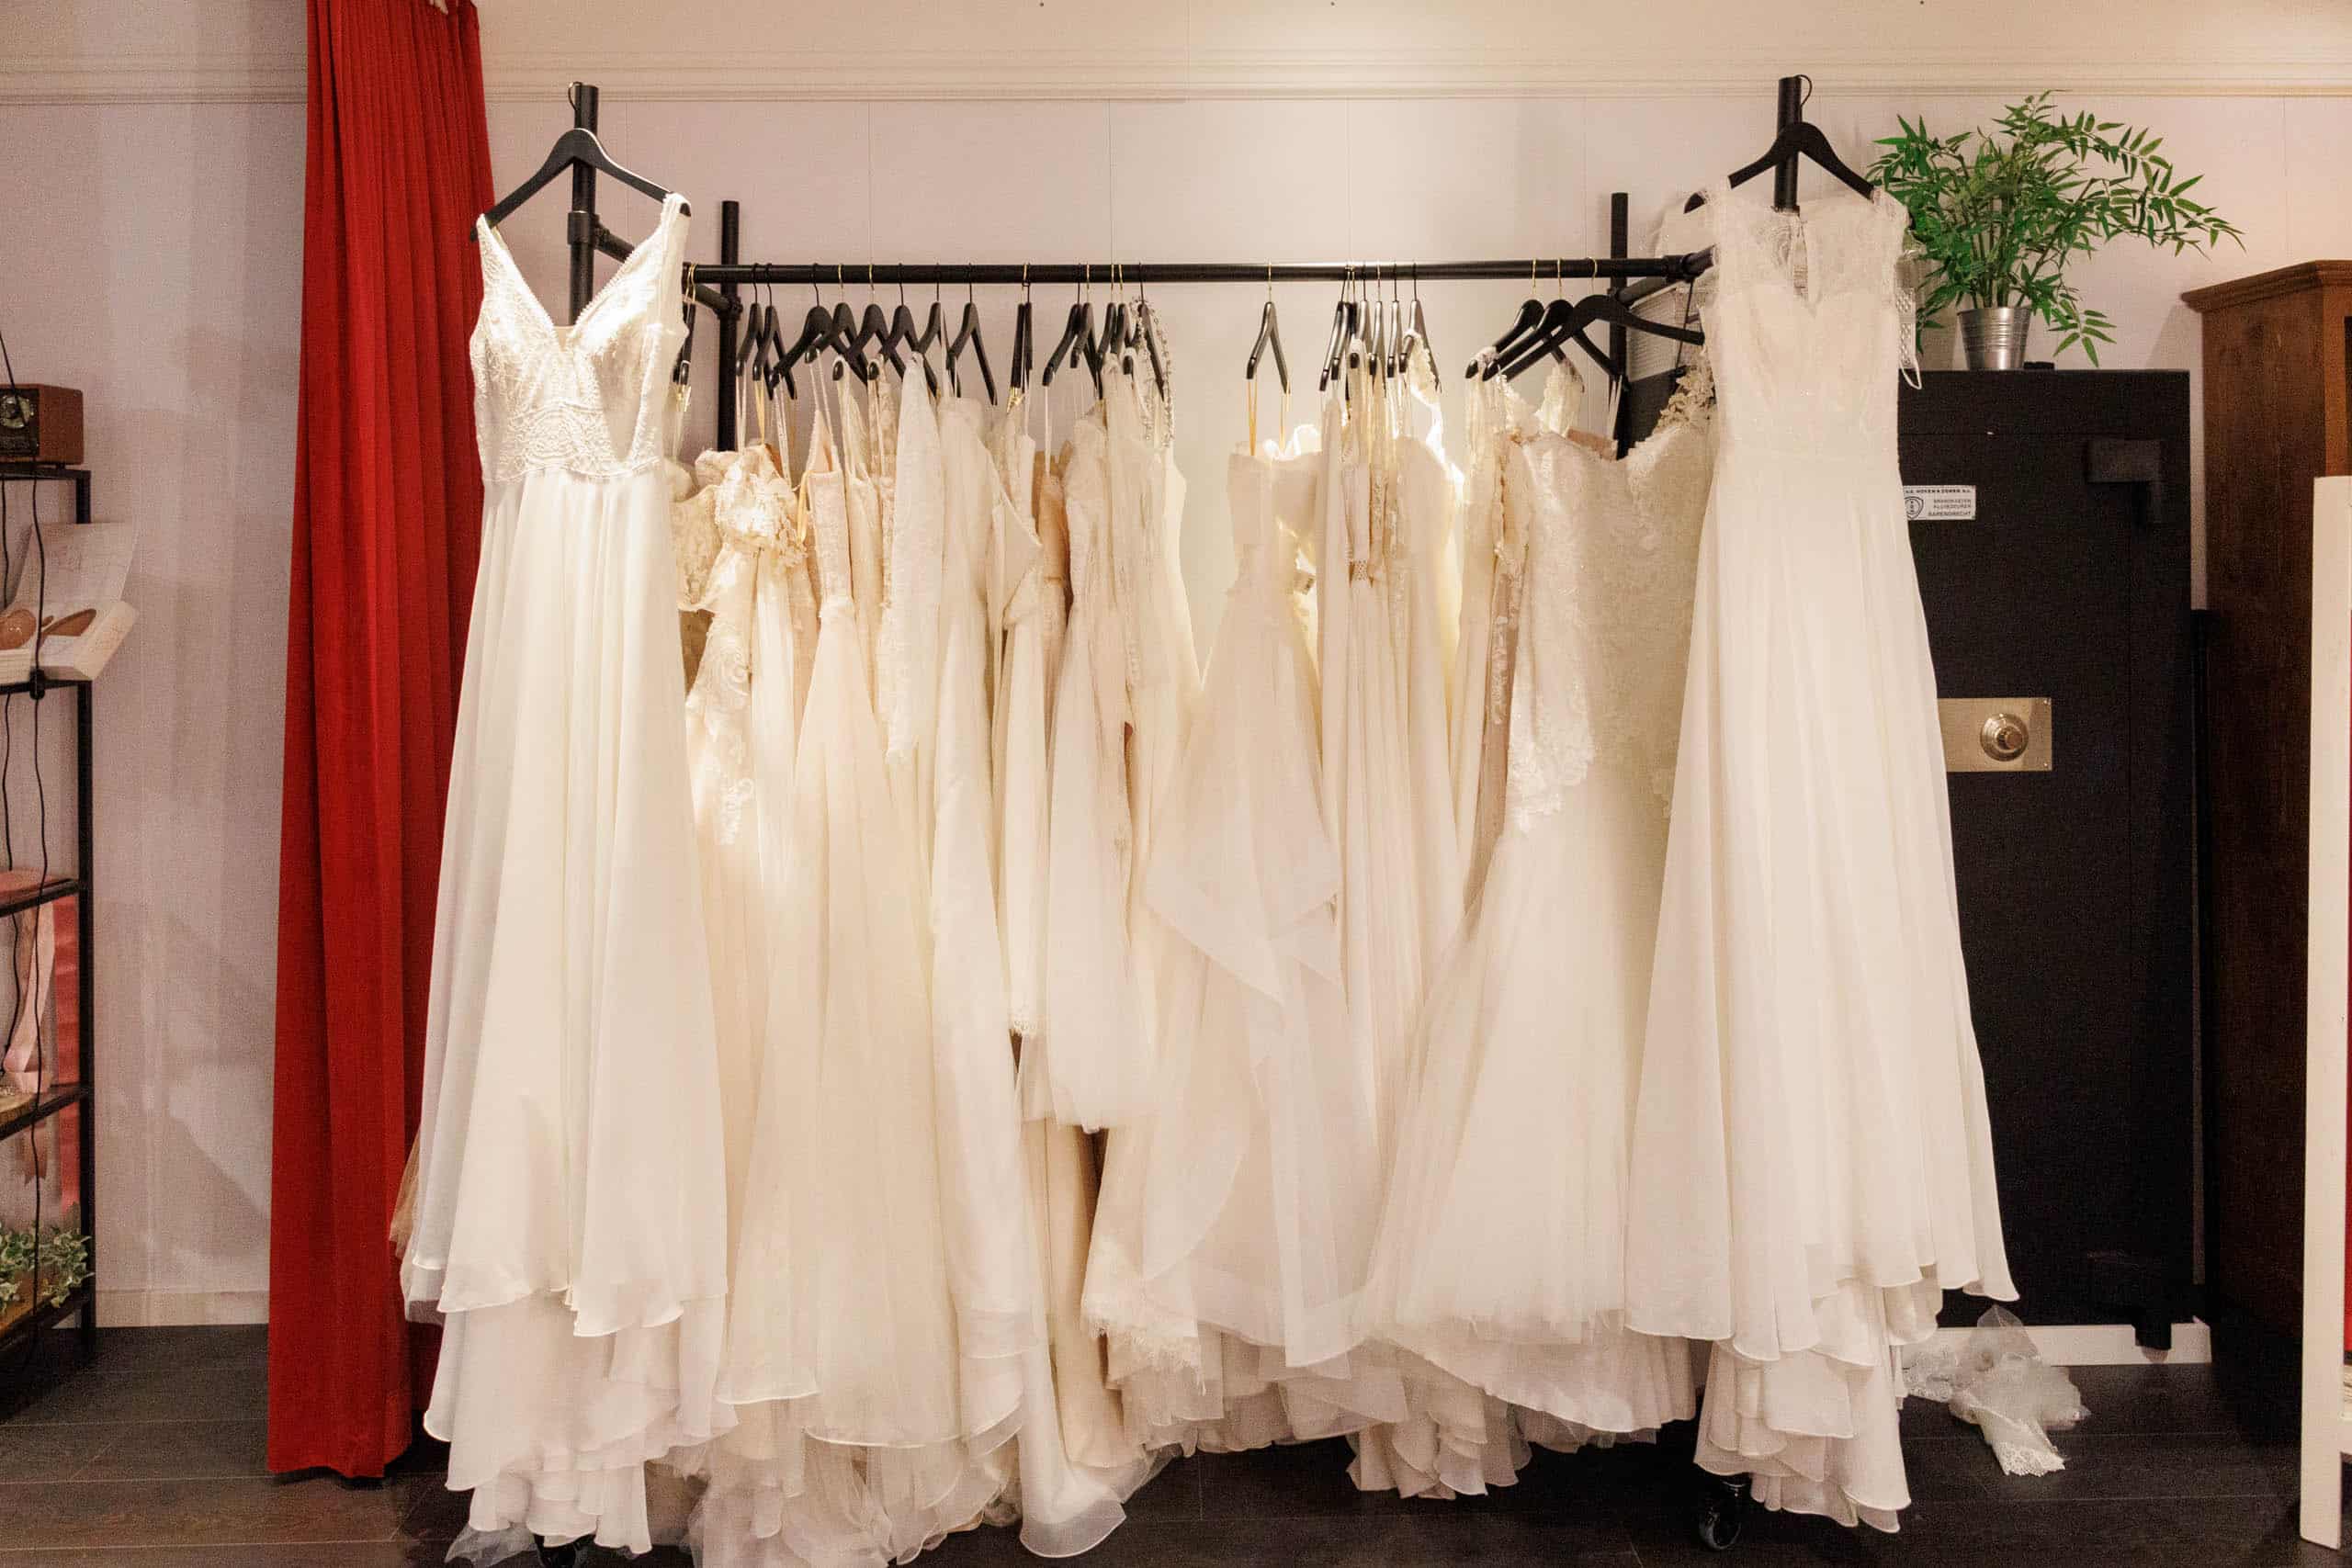 Wedding dresses hanging on a rack in a room, available to try on or for fun.